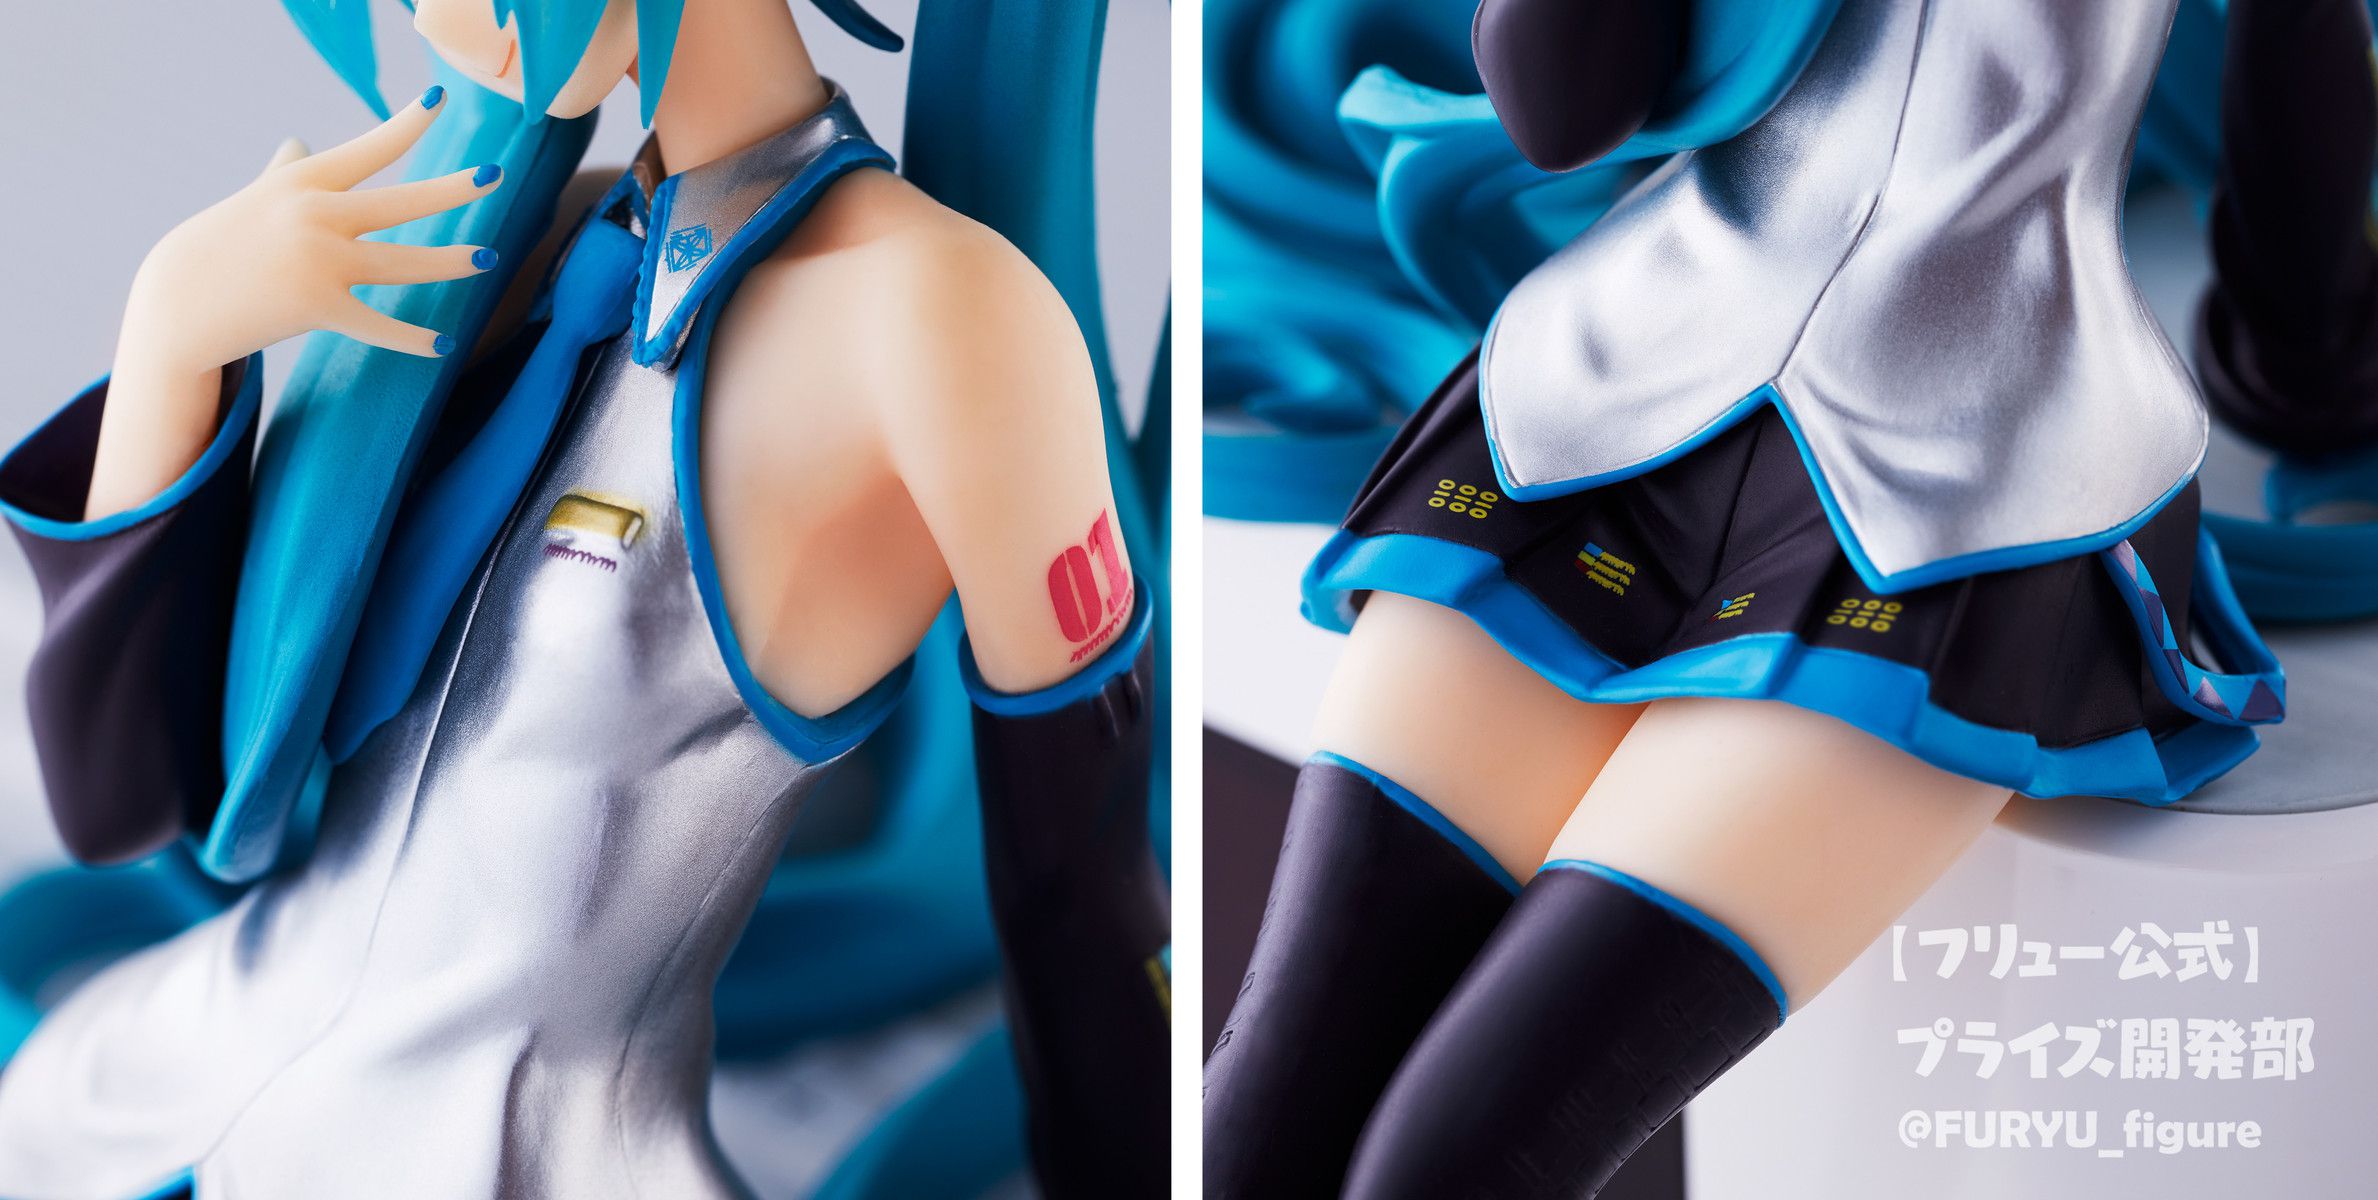 [Hatsune Miku] Nuyoru Stopper Figure, too much color and become a topic erotic 6